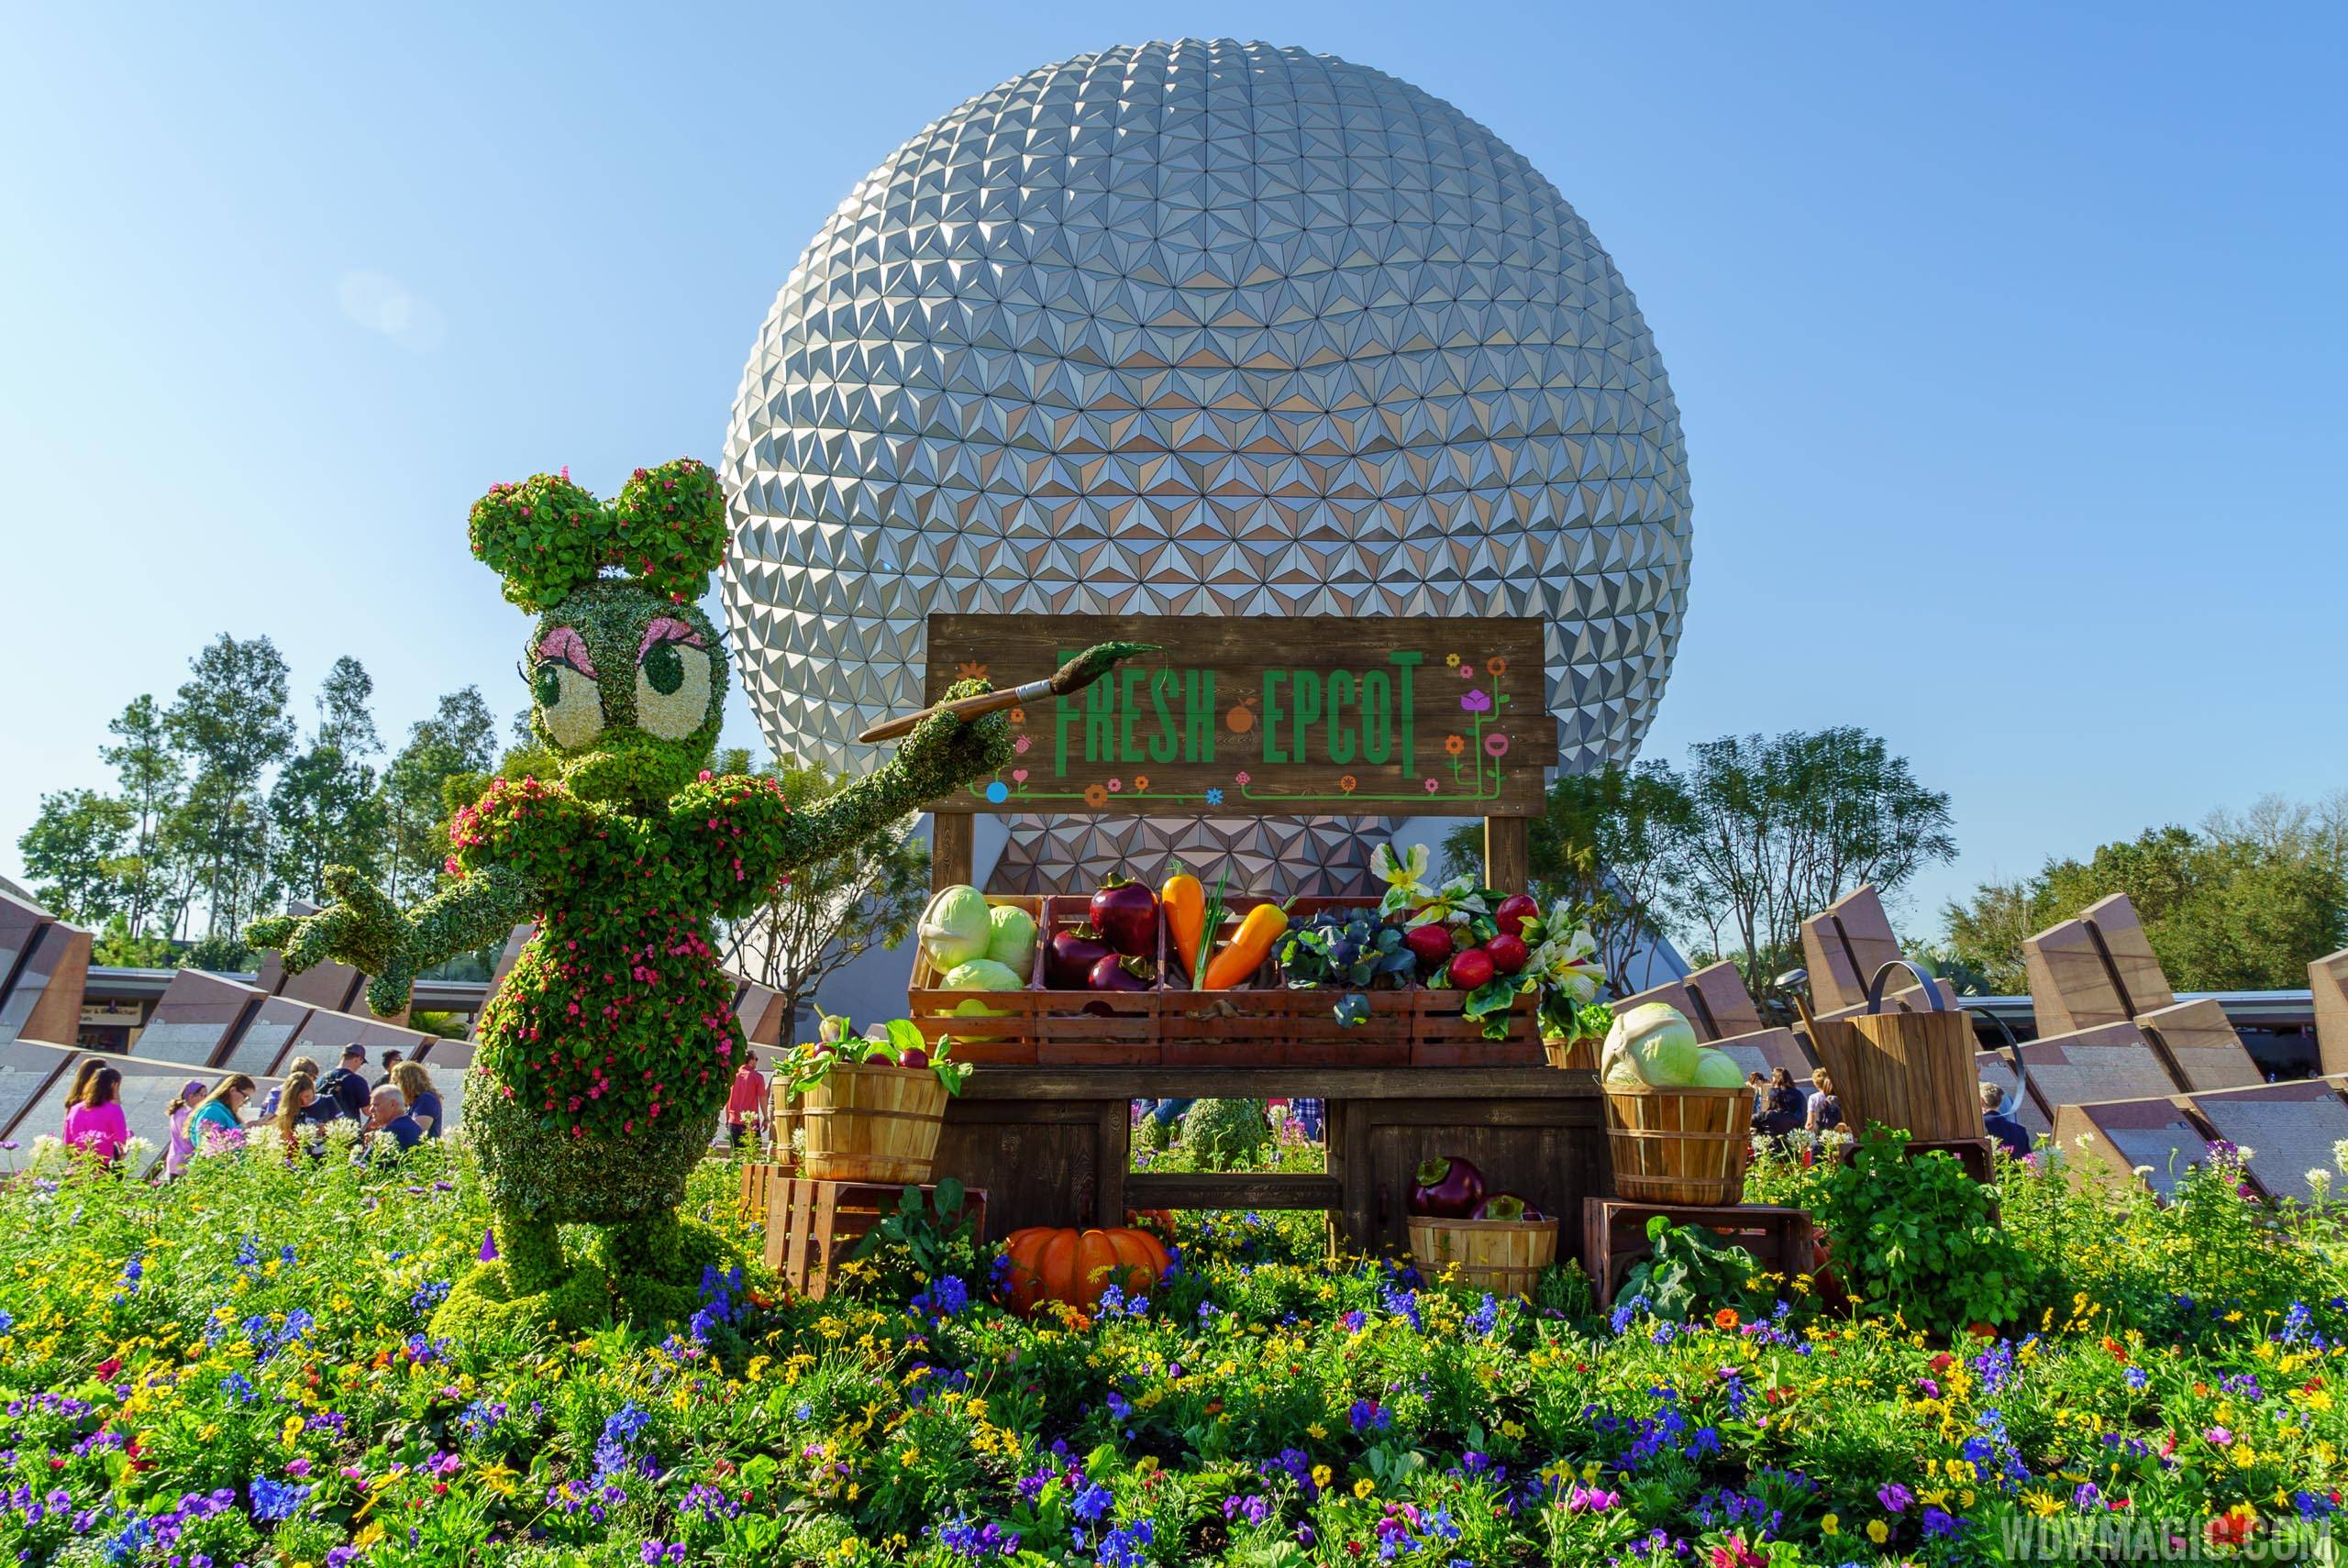 2016 Epcot International Flower and Garden Festival - Fresh Food, Fun and Flower main entrance with Donald, Daisy, Huey, Dewey and Louie